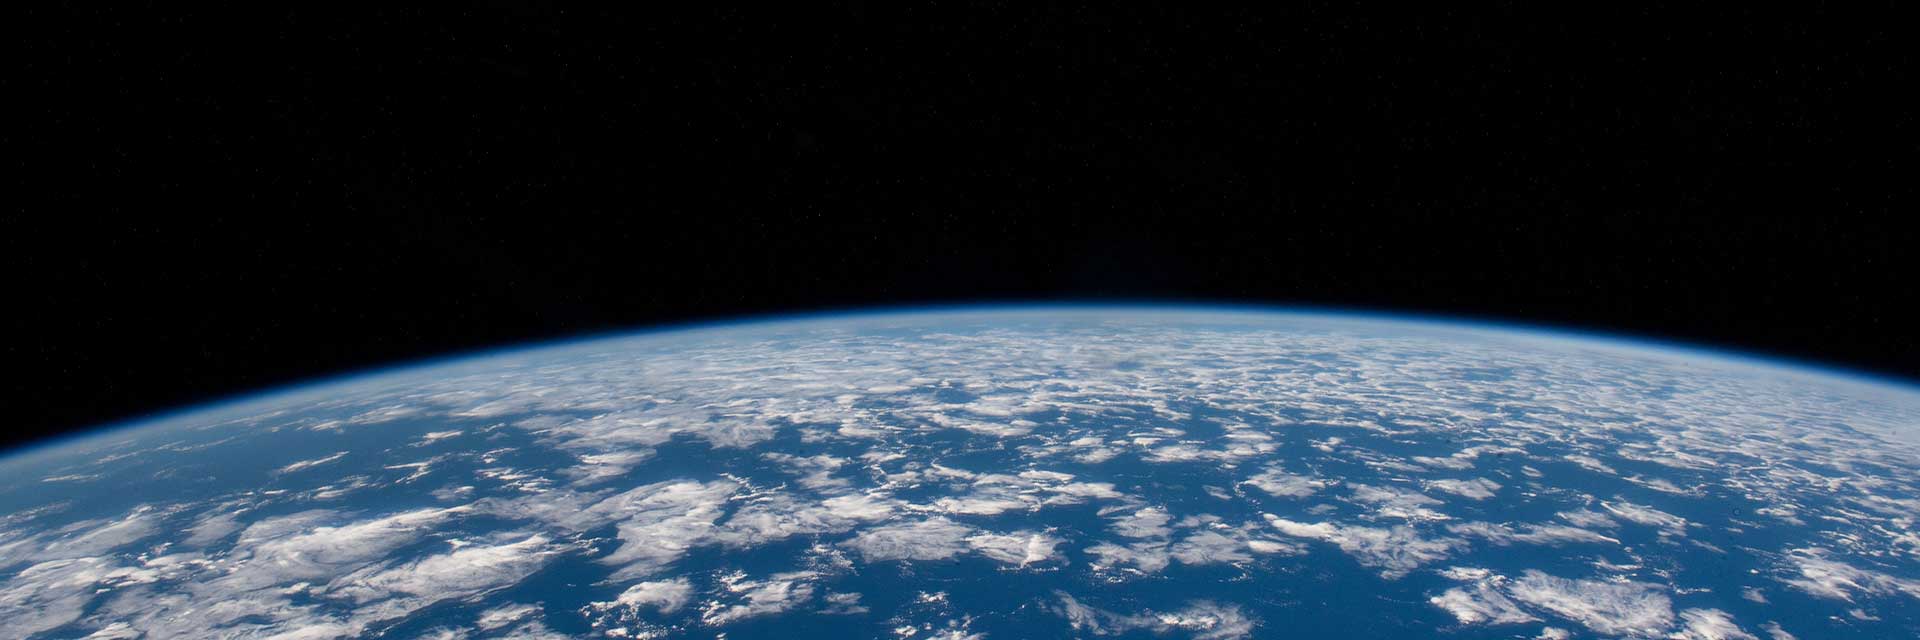 The blue limb of Earth as viewed from the space station.